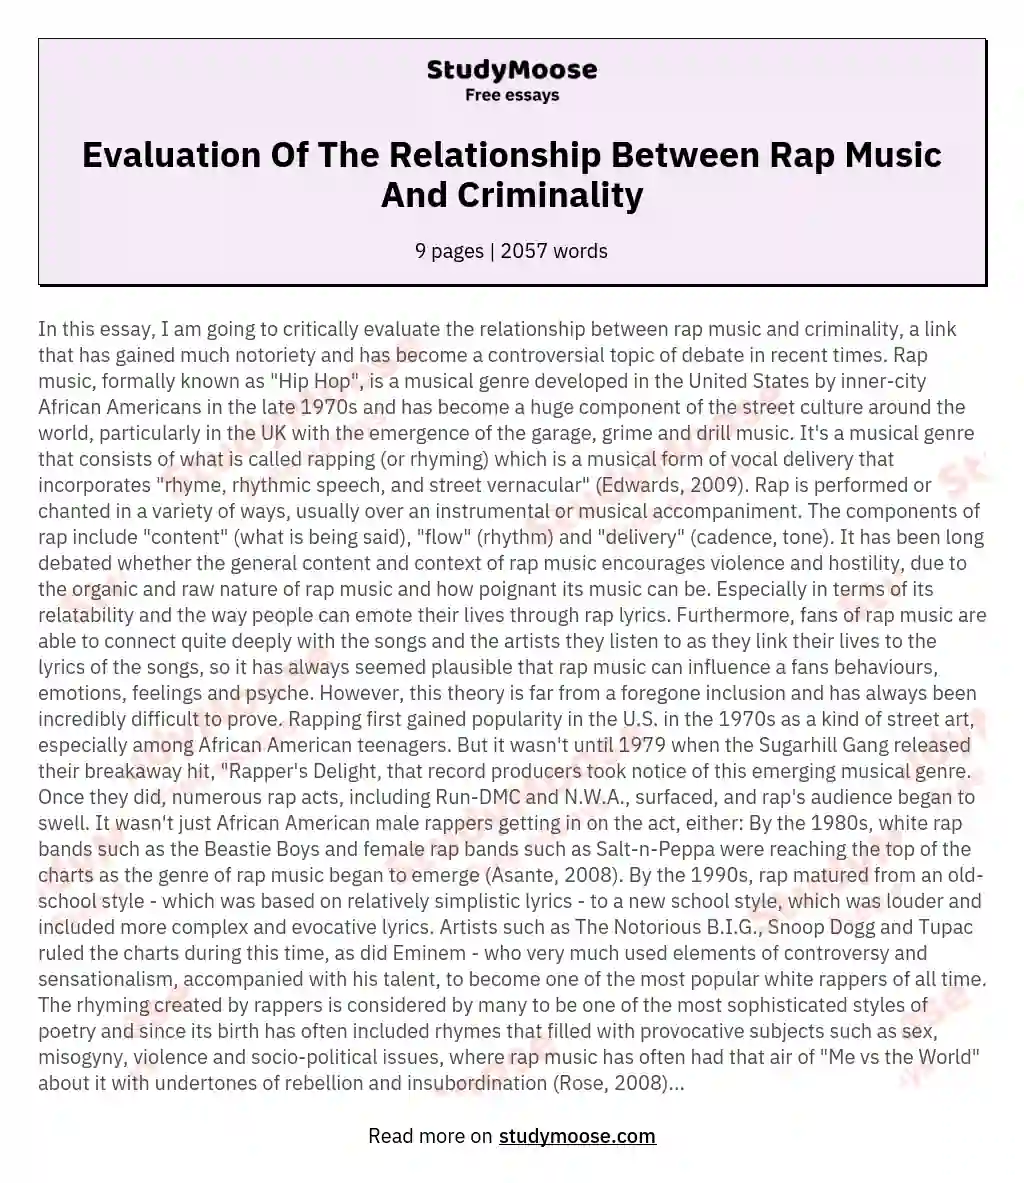 Evaluation Of The Relationship Between Rap Music And Criminality essay